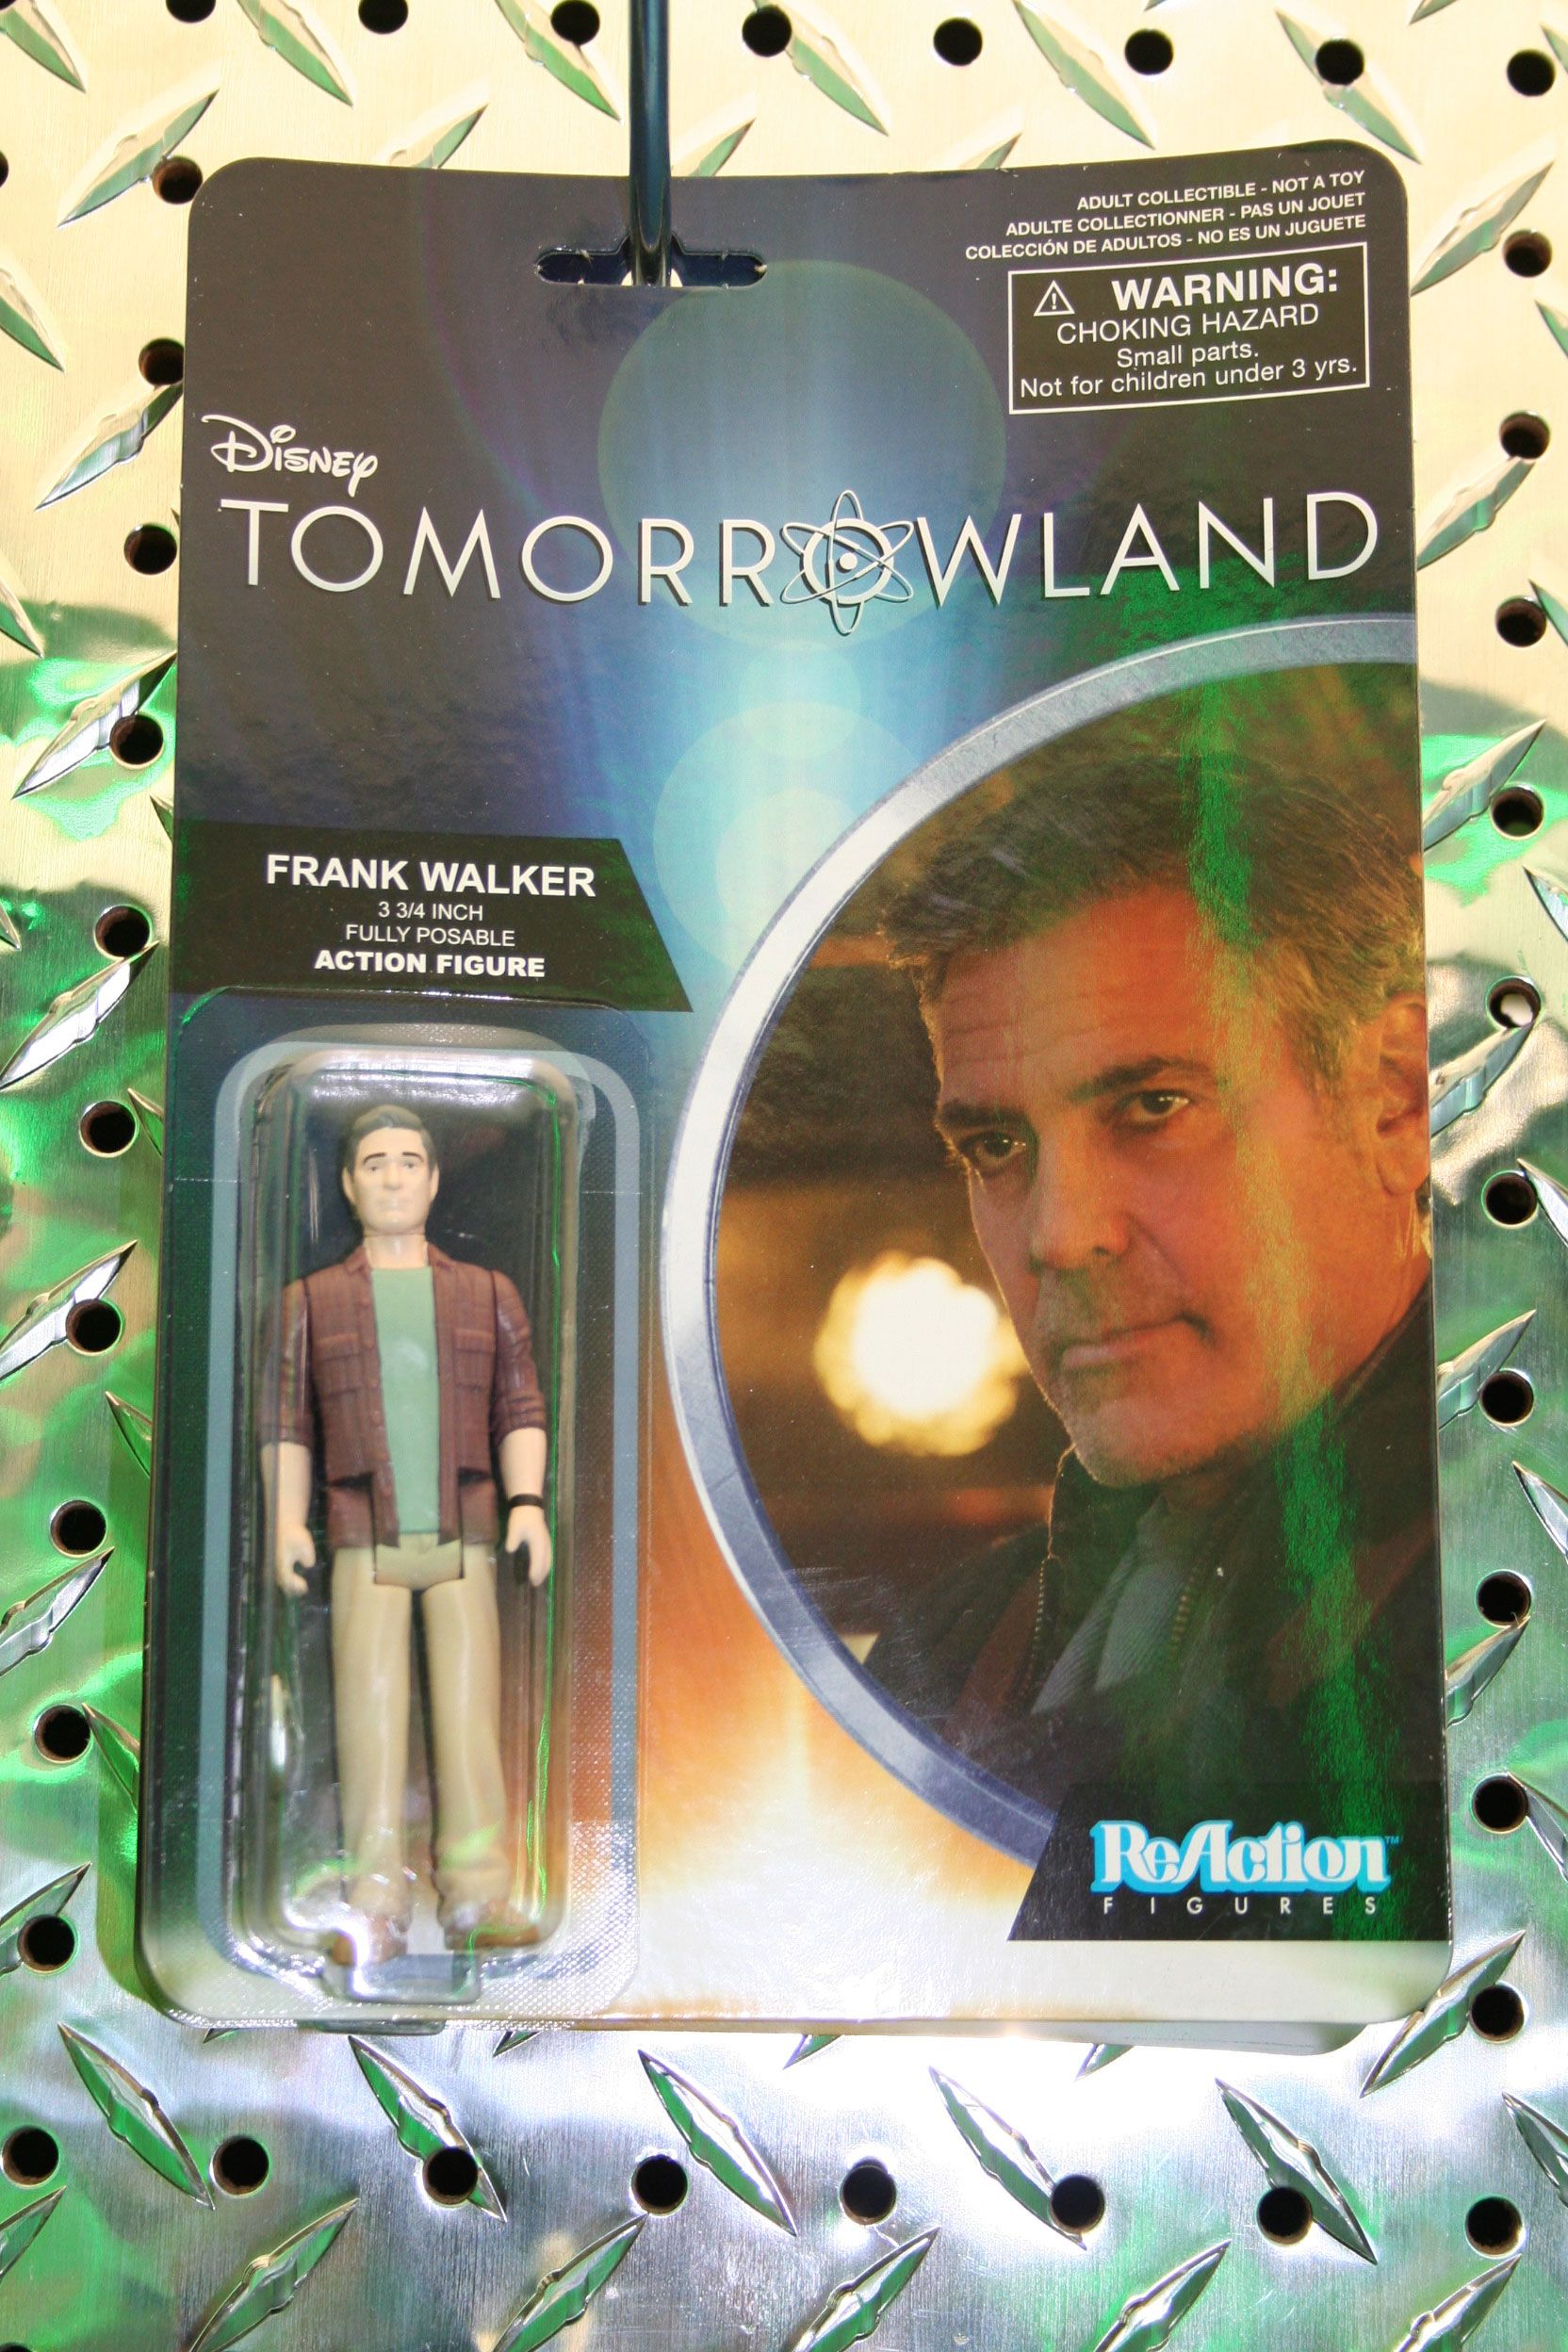 Funko Super 7 ReAction Disney TomorrowLand Young Frank Walker Fully Posable